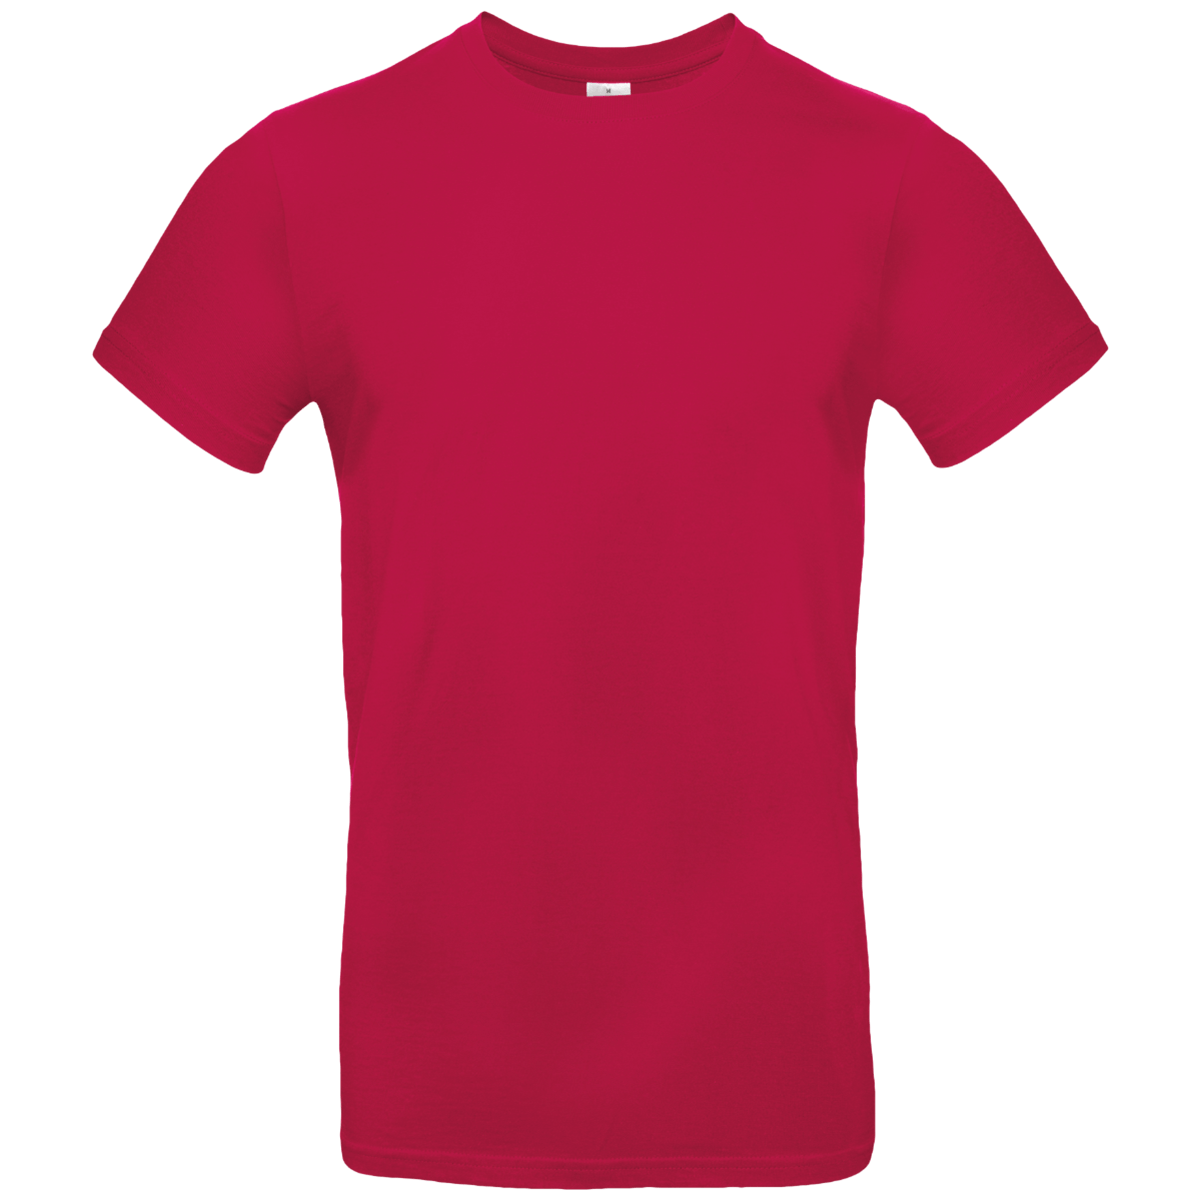 Tee-Shirt Homme Personnalisable Sur Tunetoo Sorbet